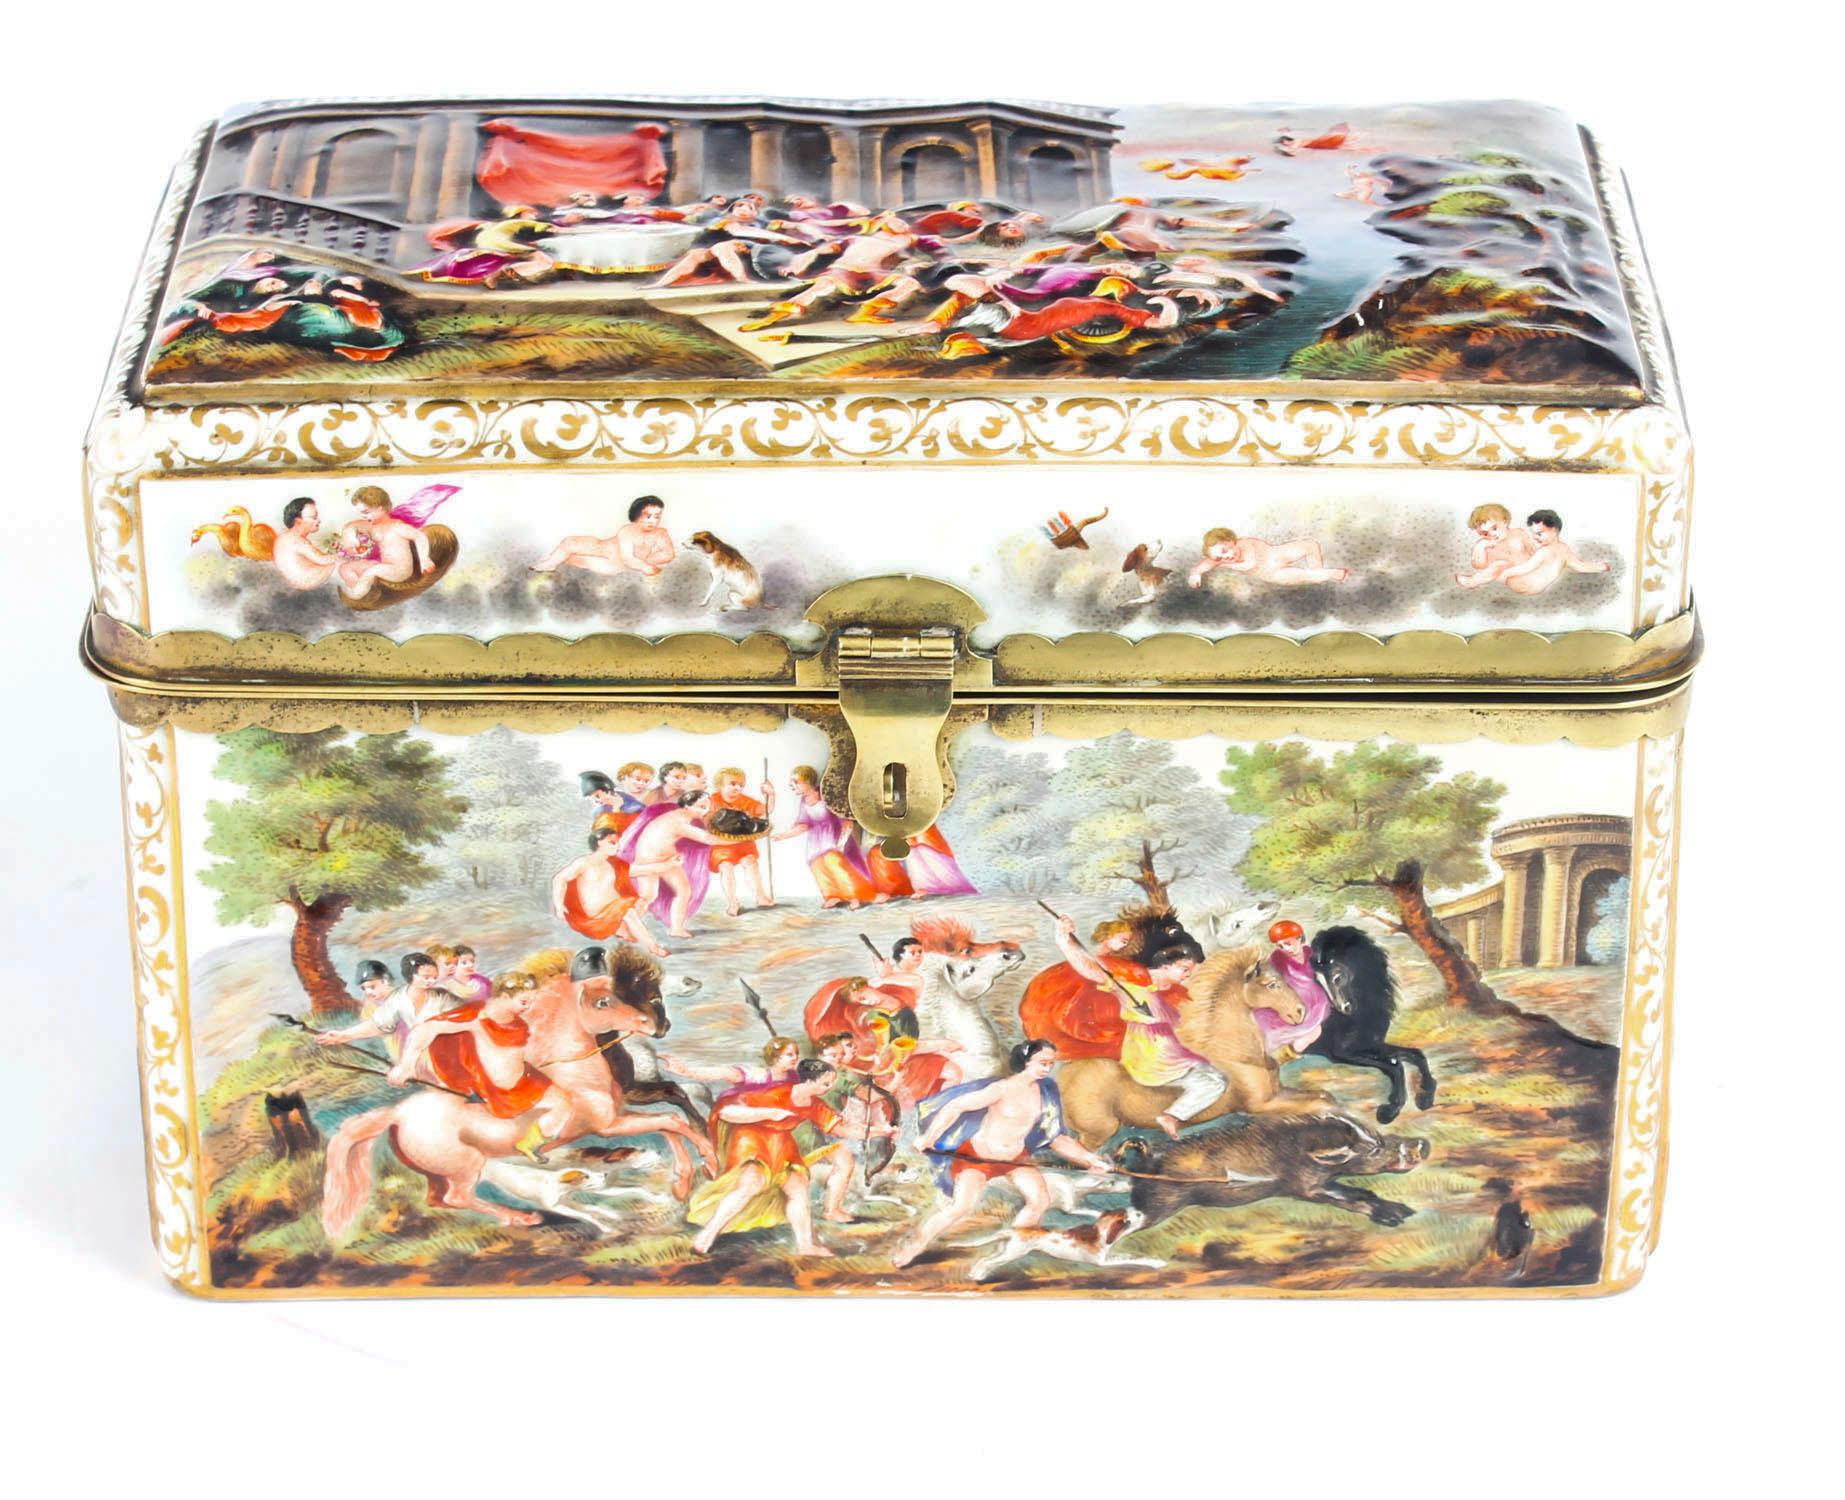 This is a beautiful antique large Italian Capodimonte porcelain table casket, 1880 in date. 

It features a gladiatorial scene with the Emperor and Empress on the lid, the sides are lavishly decorated with playful putti and hunting scenes, and it